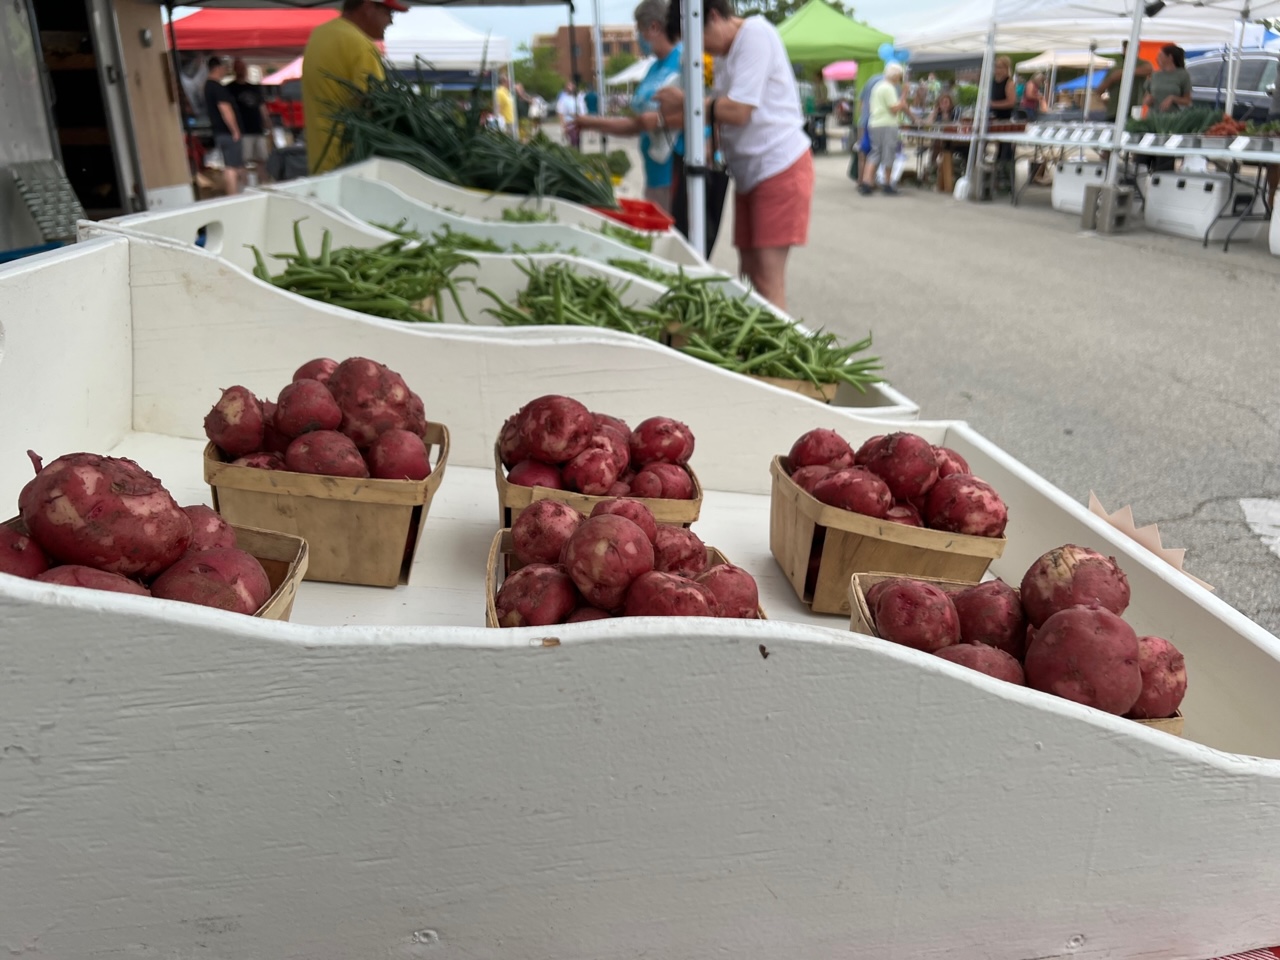 At the market, there are white shelves with a few baskets of potatoes and green beans. In the background, shoppers shop the Urbana Market at the Square. Photo by Alyssa Buckley.